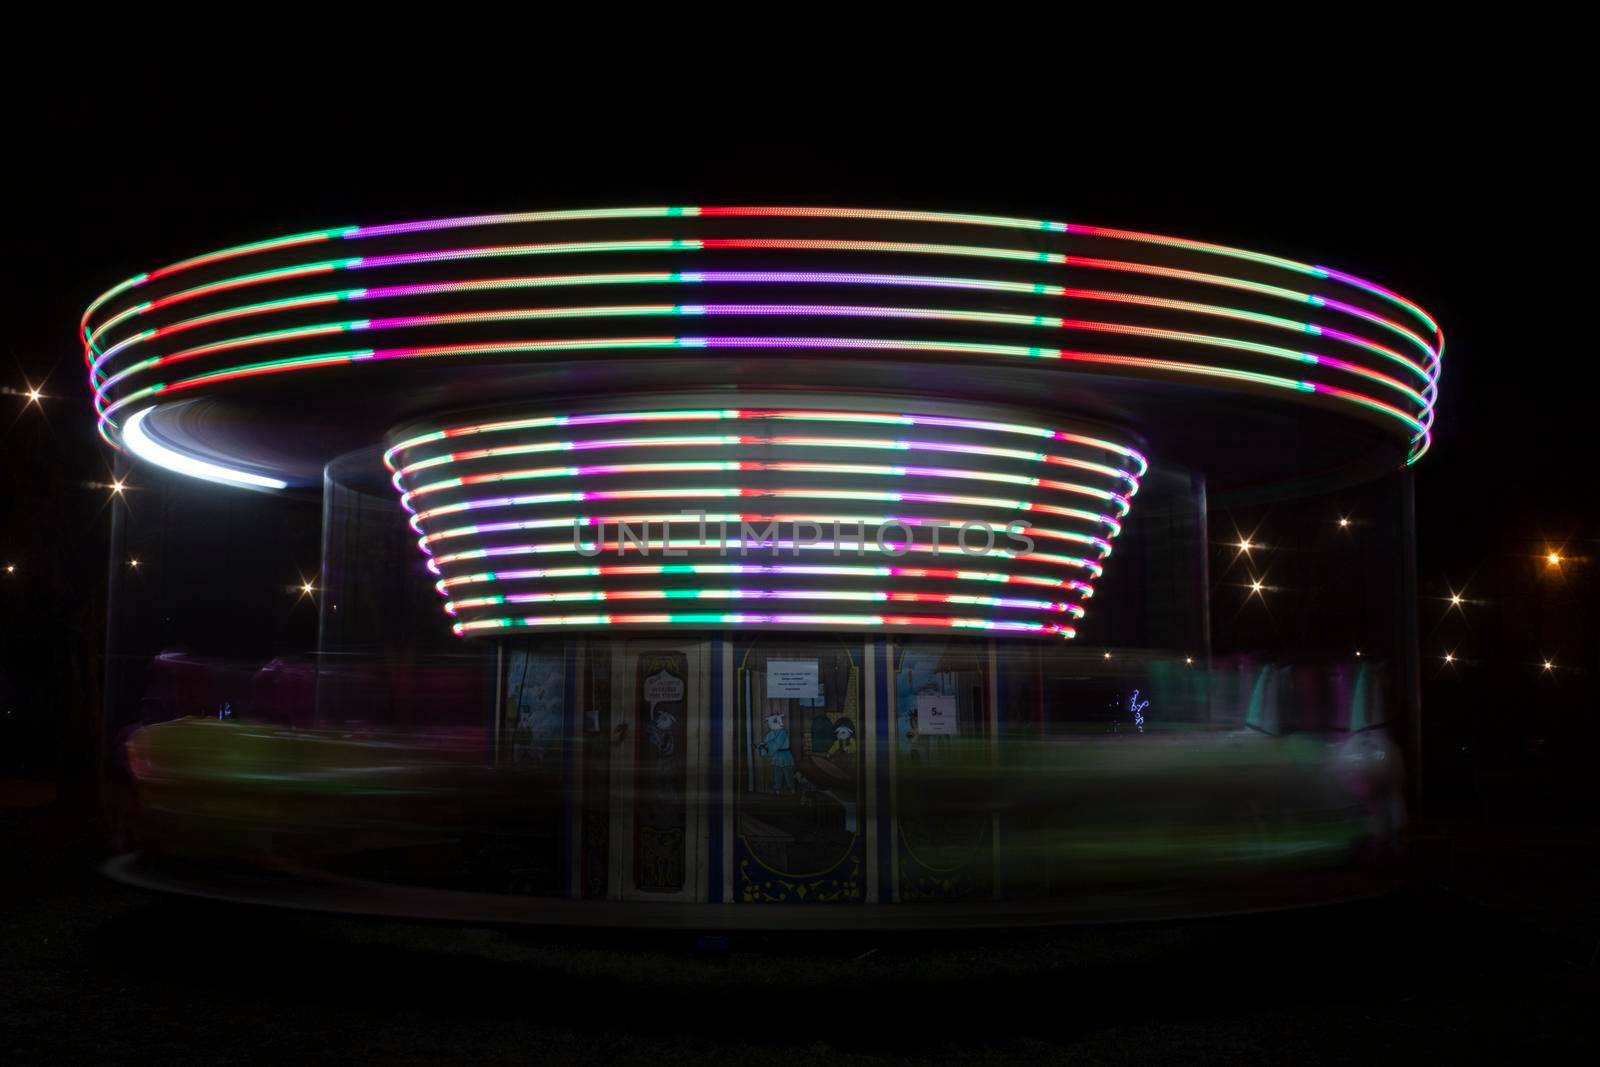 A colorful carousel spinning with a long exposure time